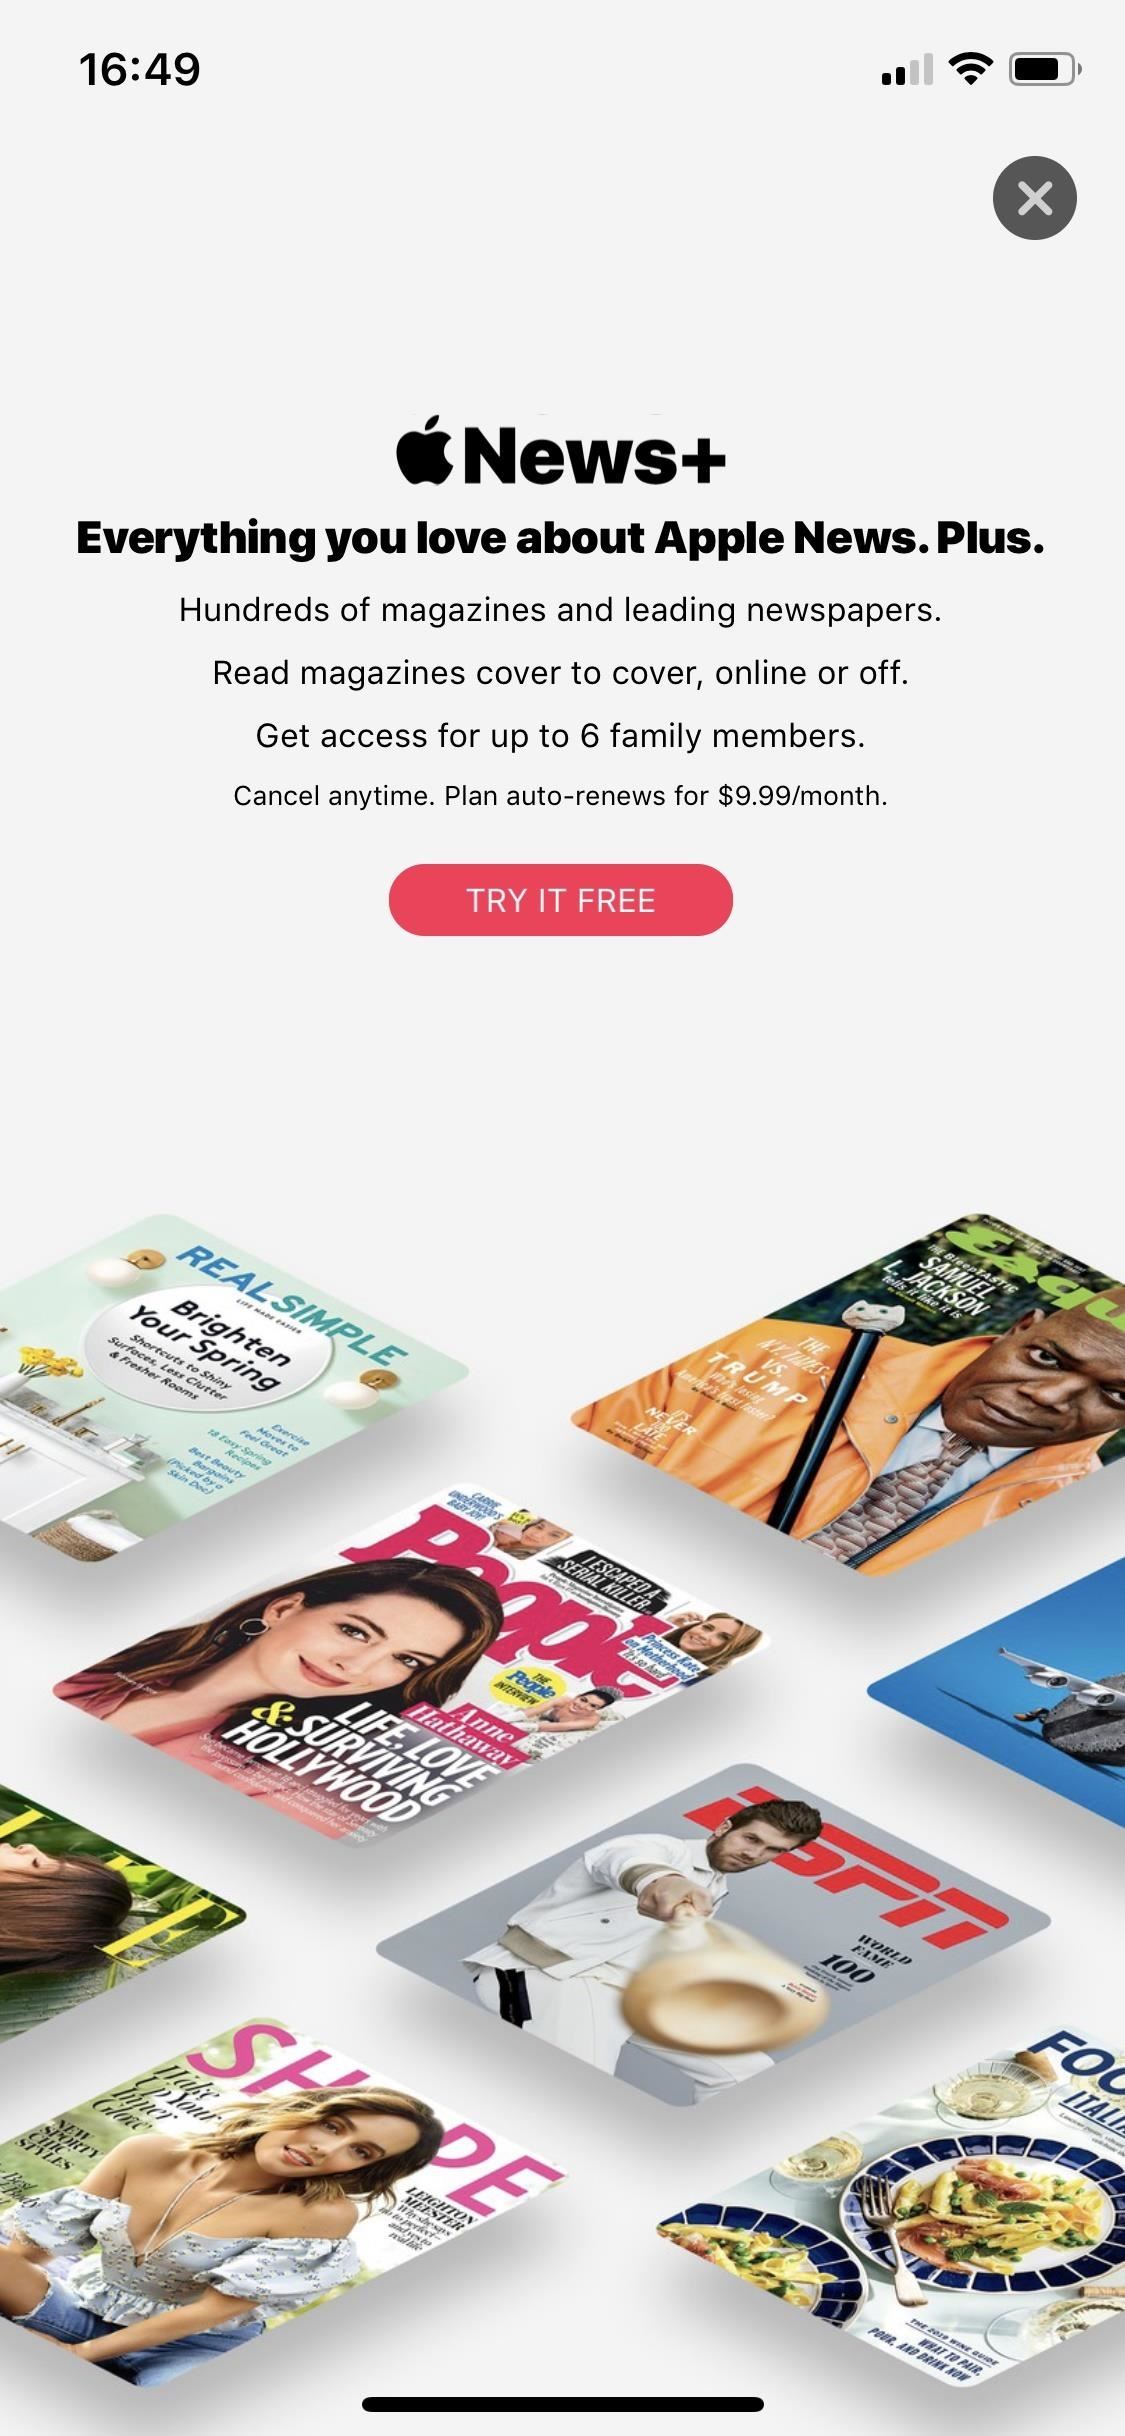 How to Cancel the Apple News+ Auto-Renewal Before Your Free Trial Ends